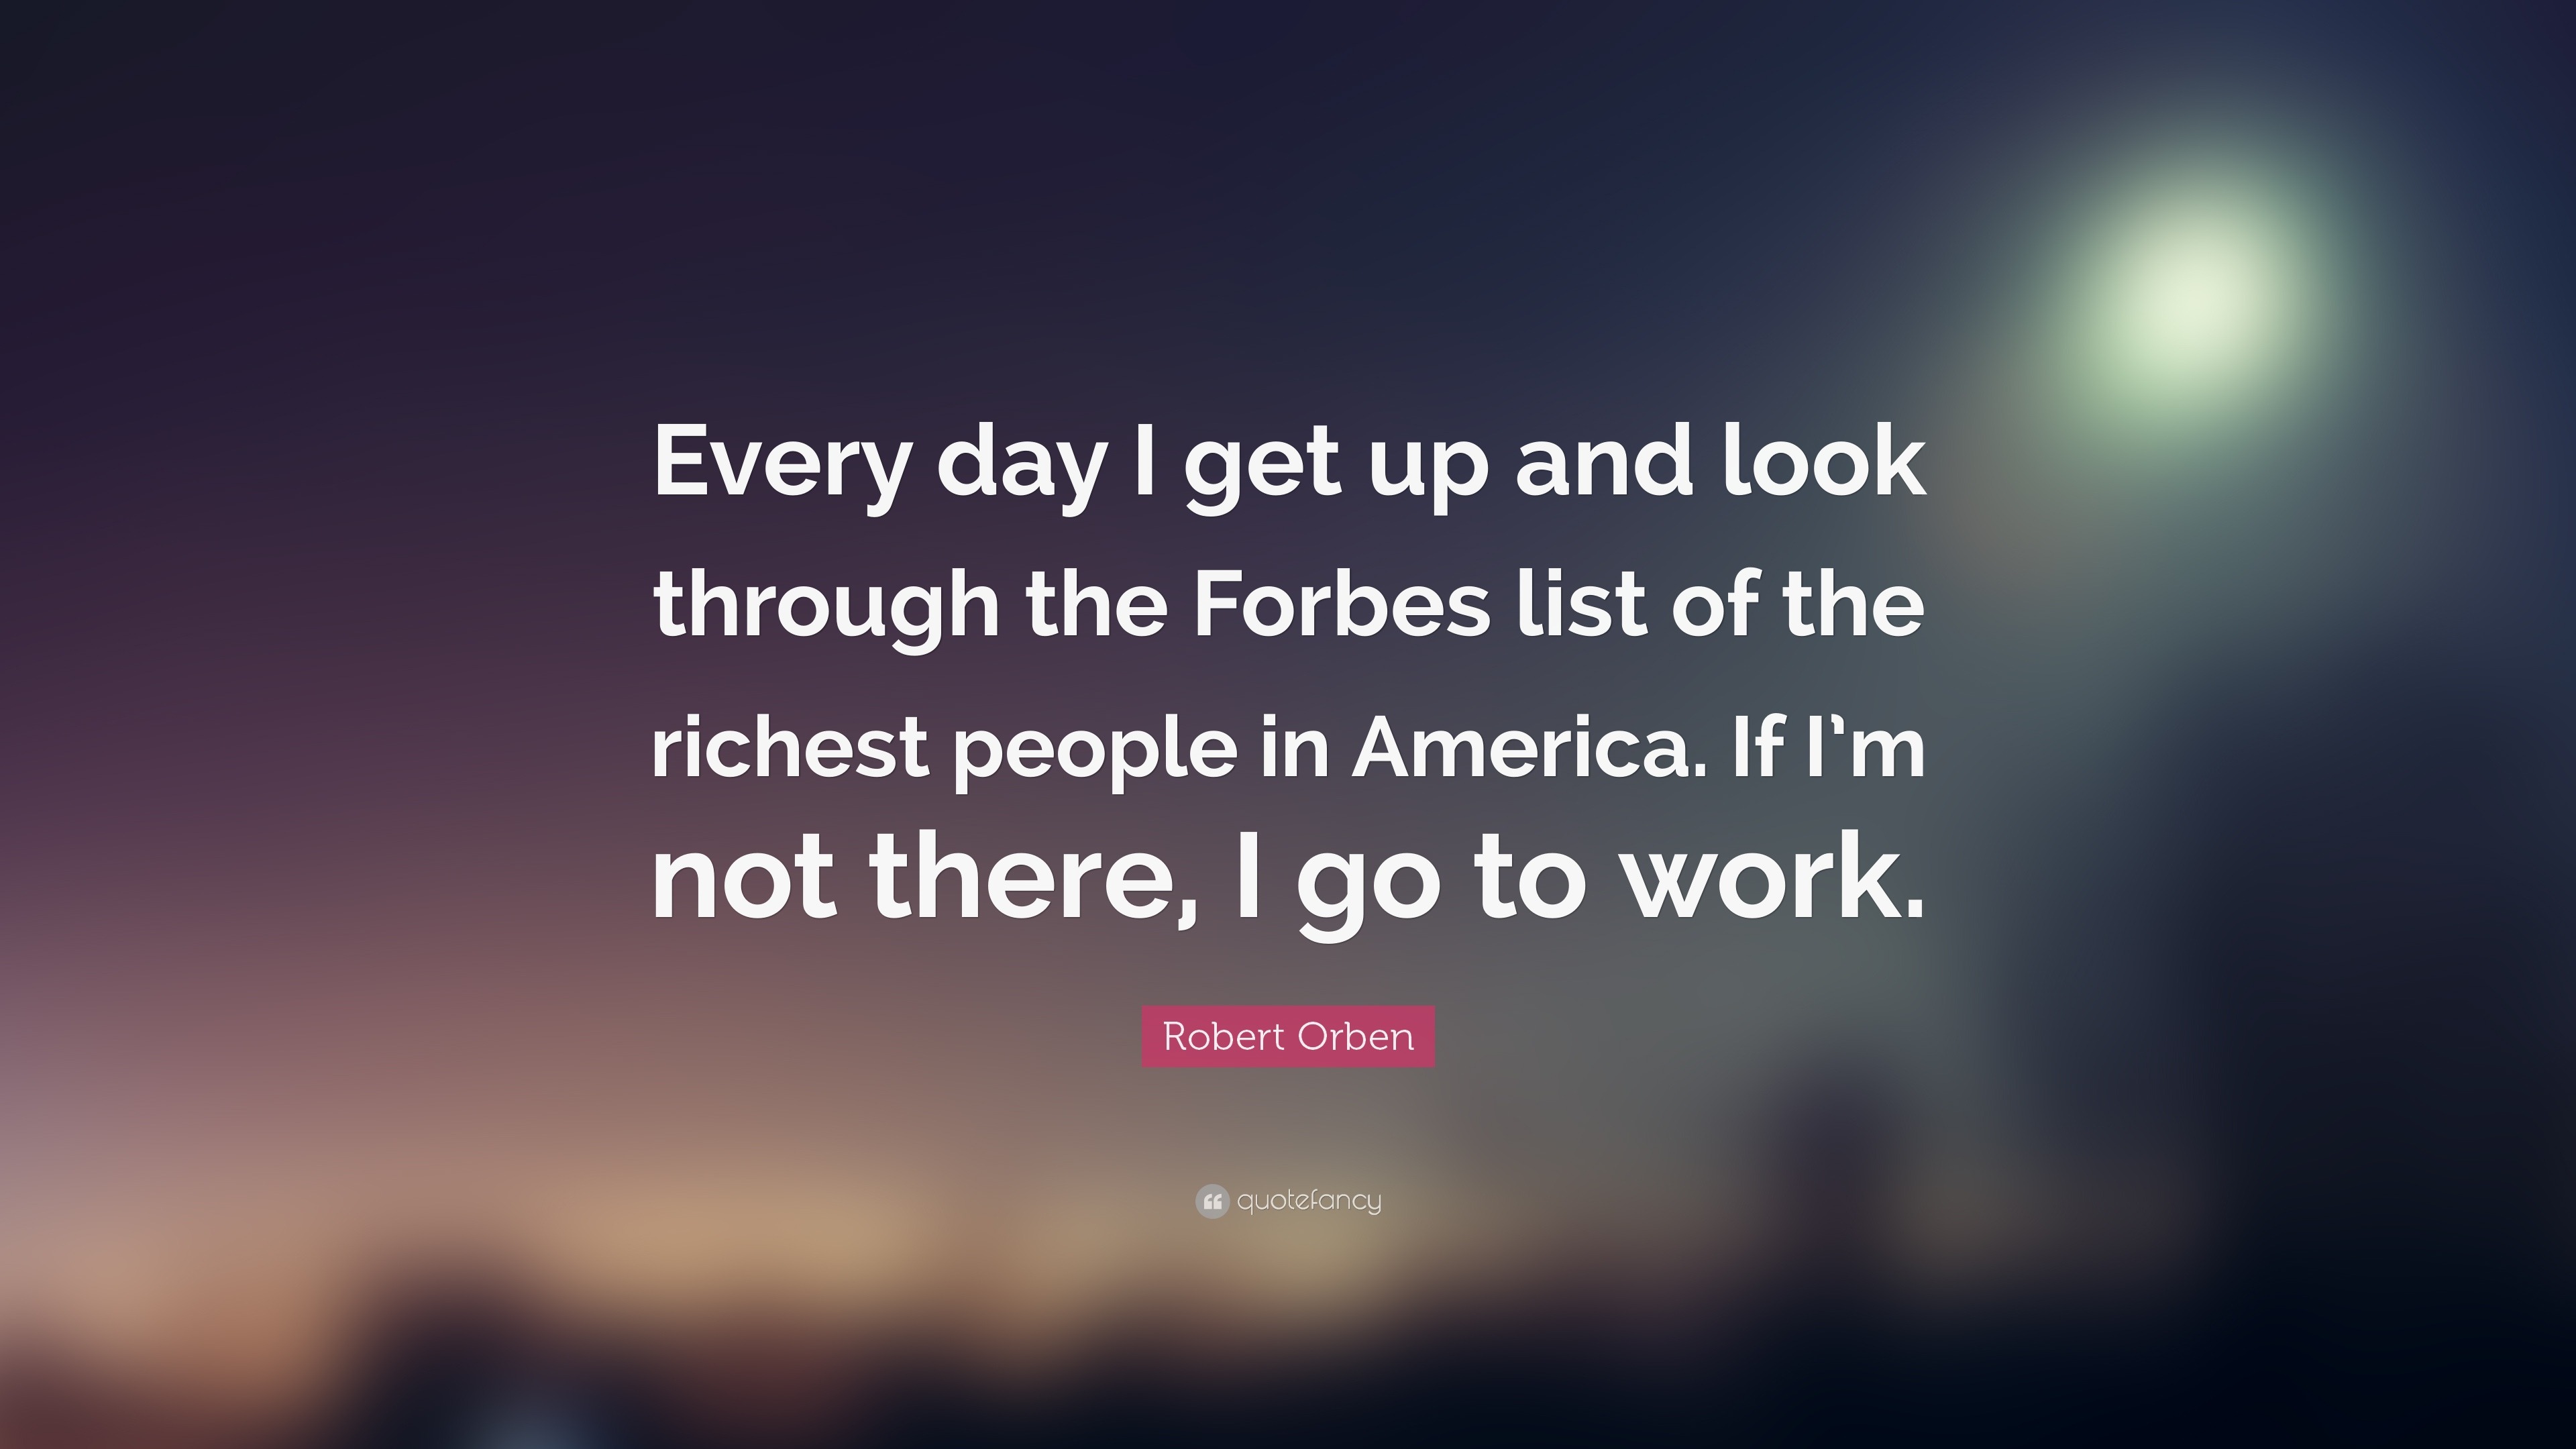 Robert Orben Quote: “Every day I get up and look through the Forbes